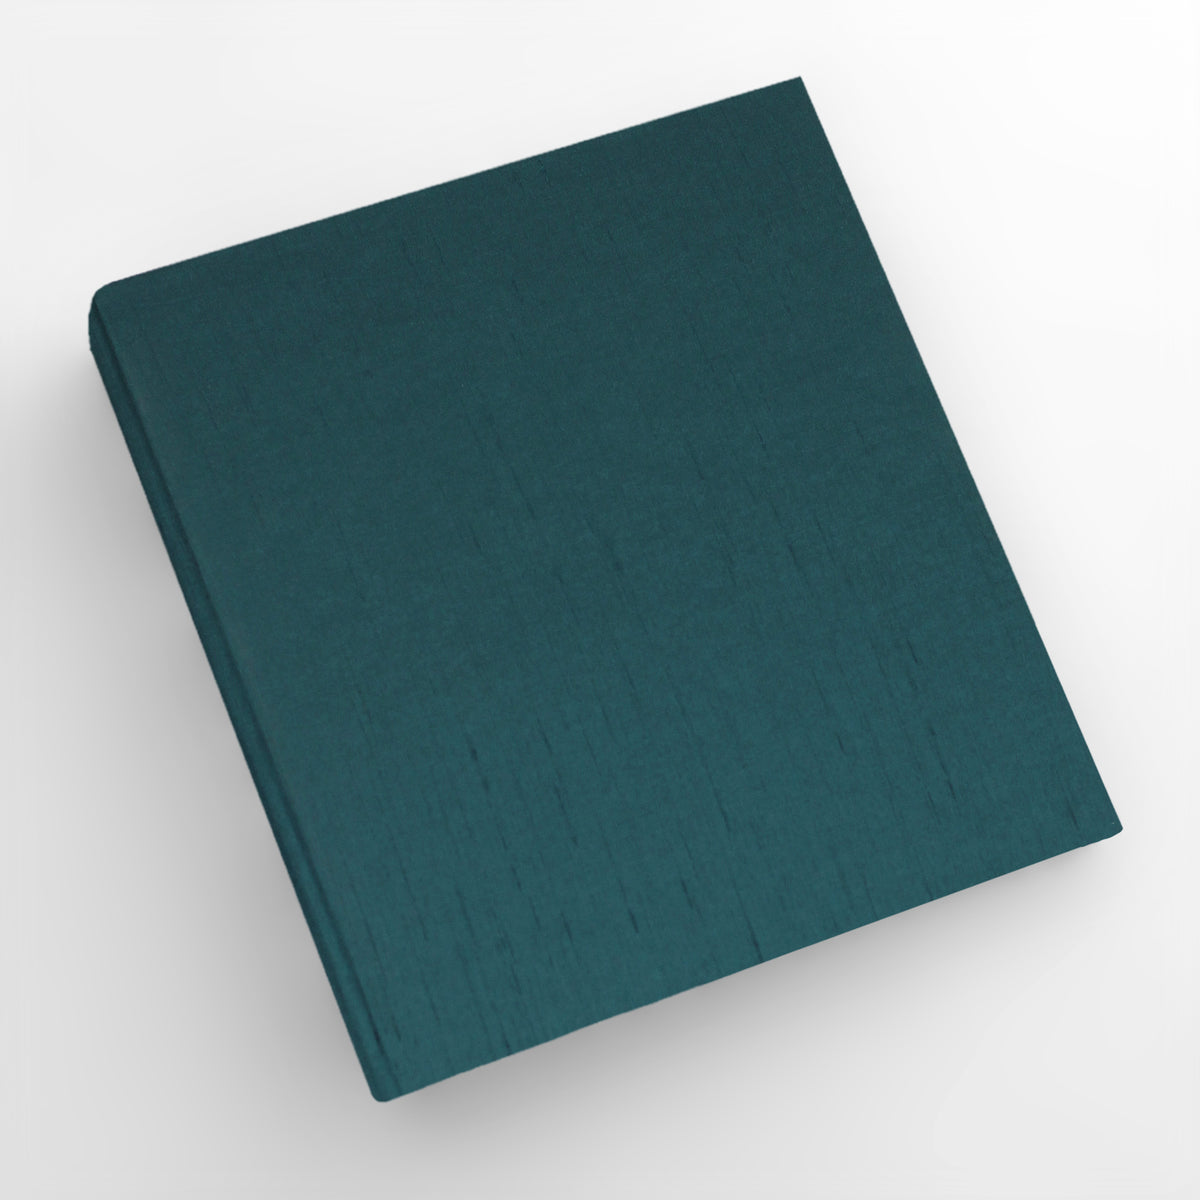 Large Photo Binder For 4x6 Photos | Cover: Teal Blue Silk | Available Personalized